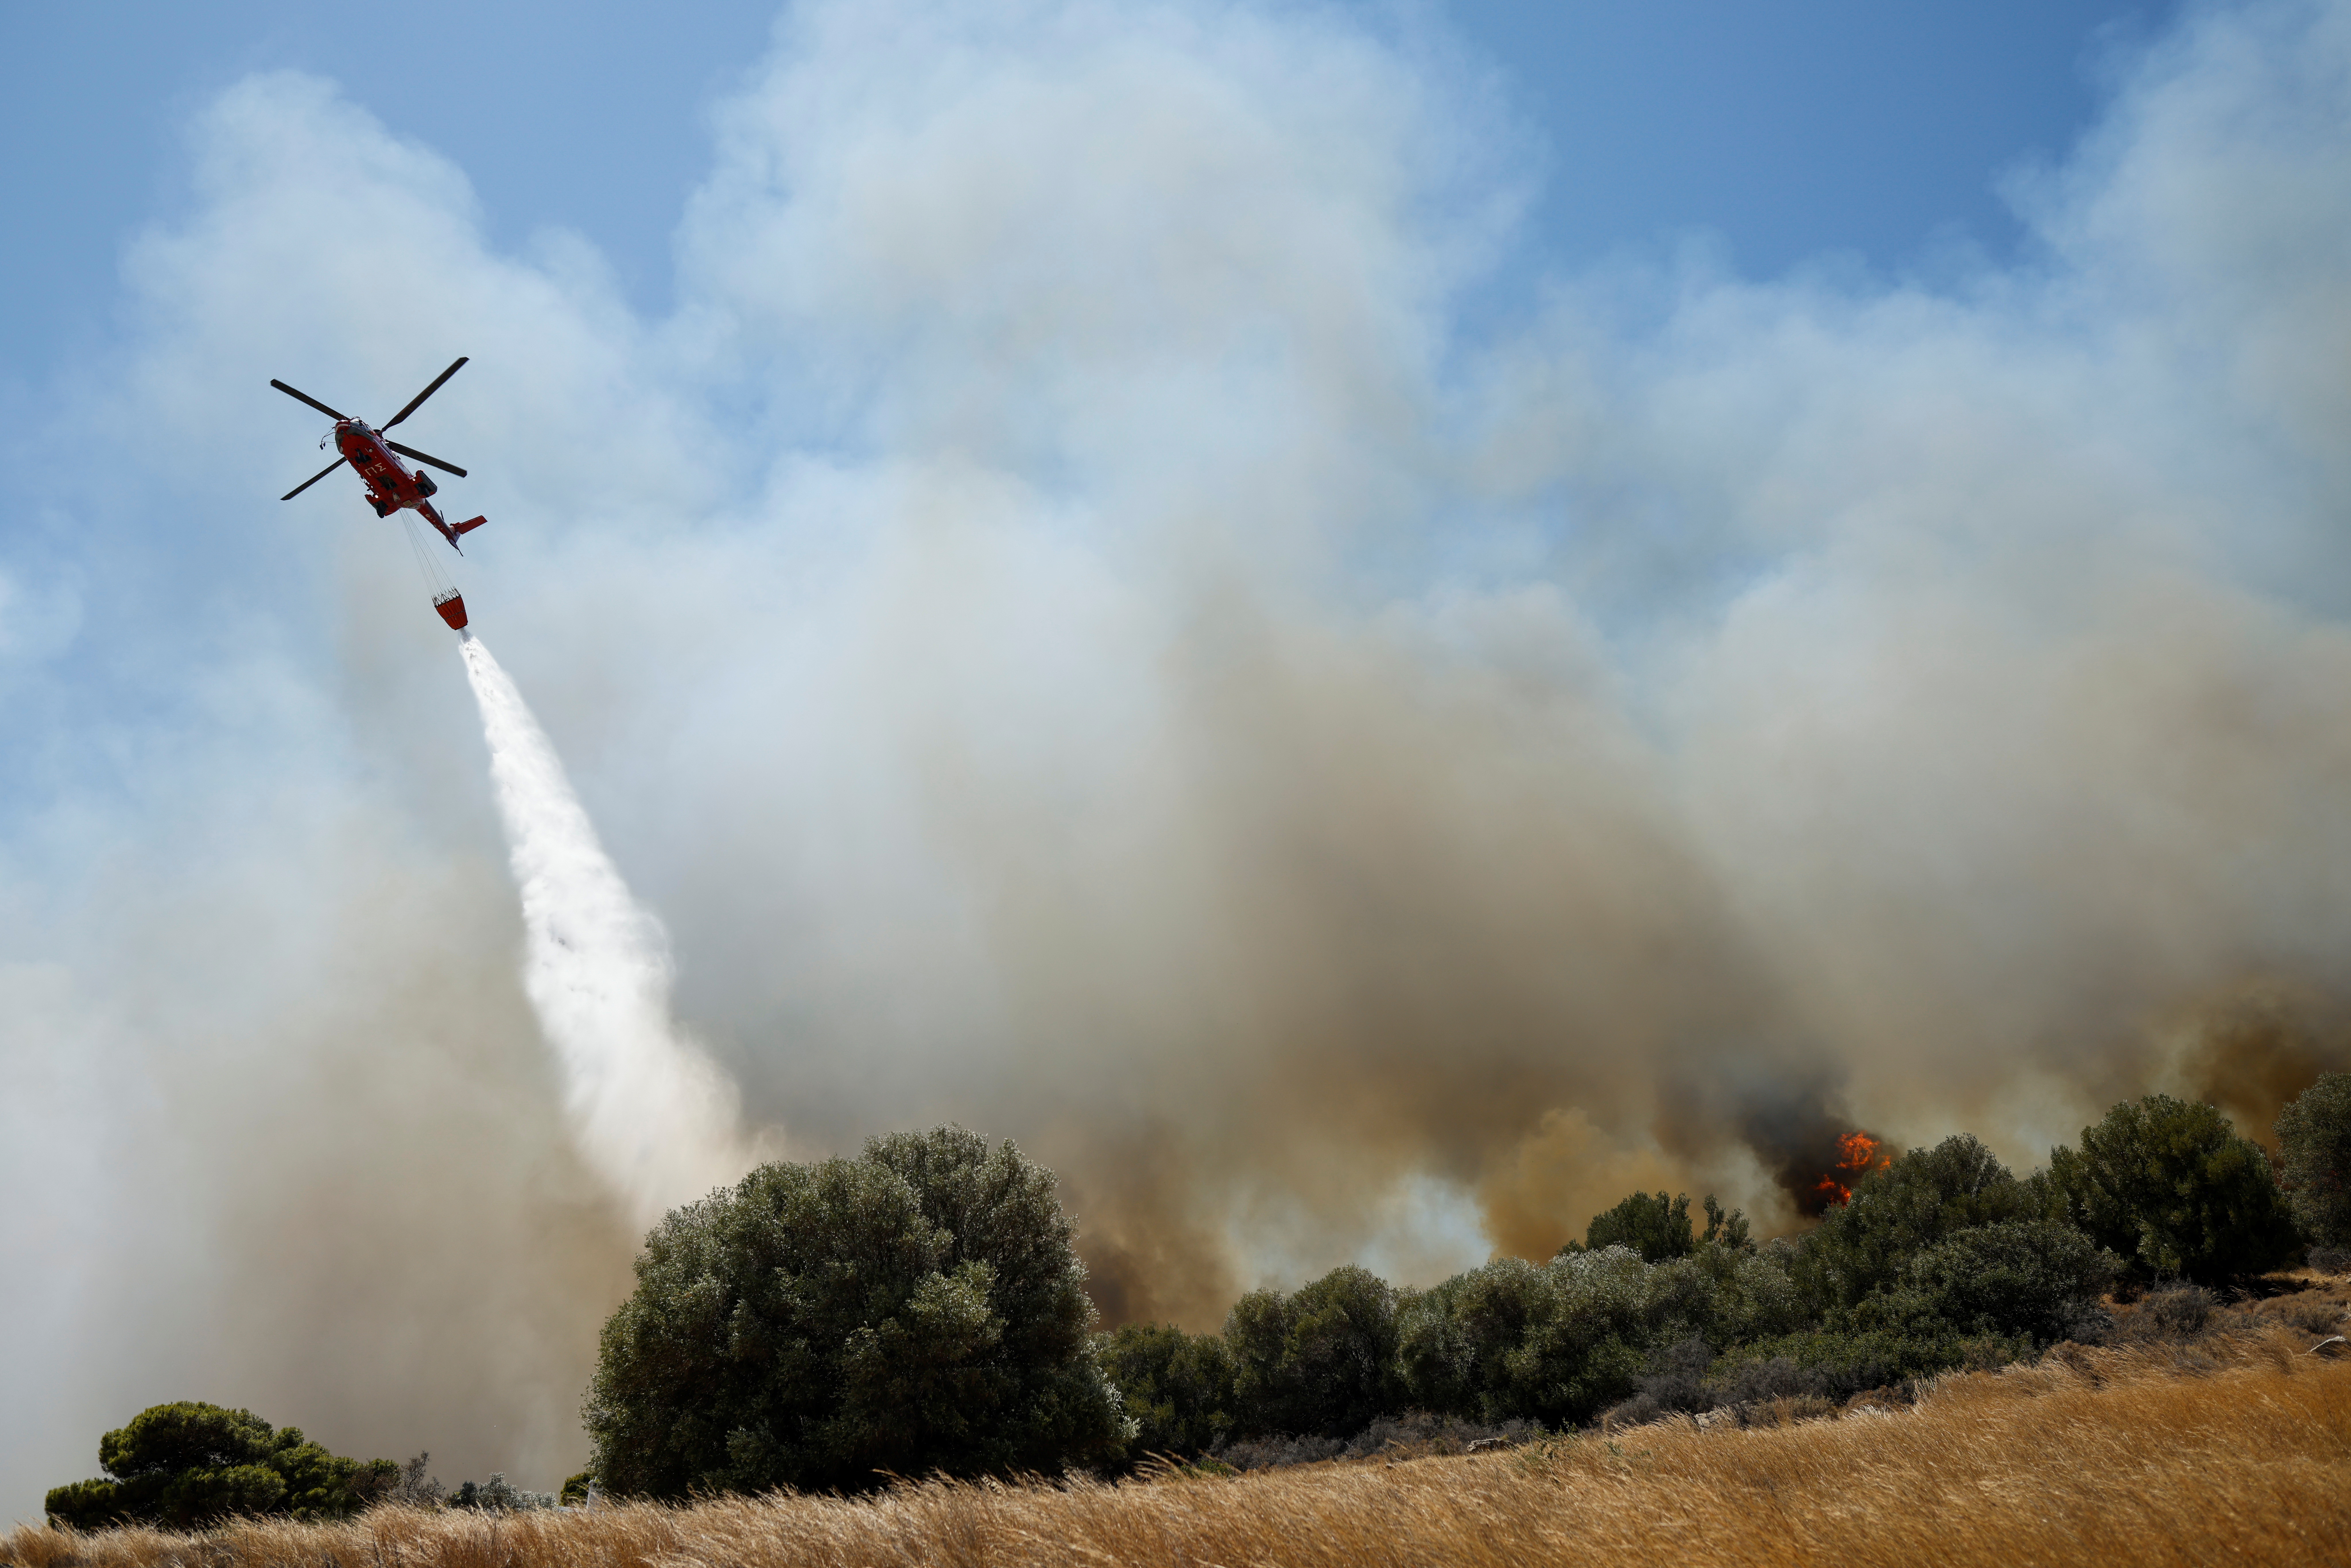 A firefighting helicopter makes a water drop as a wildfire burns in the village of Markati, near Athens, Greece, August 16, 2021. REUTERS/Alkis Konstantinidis